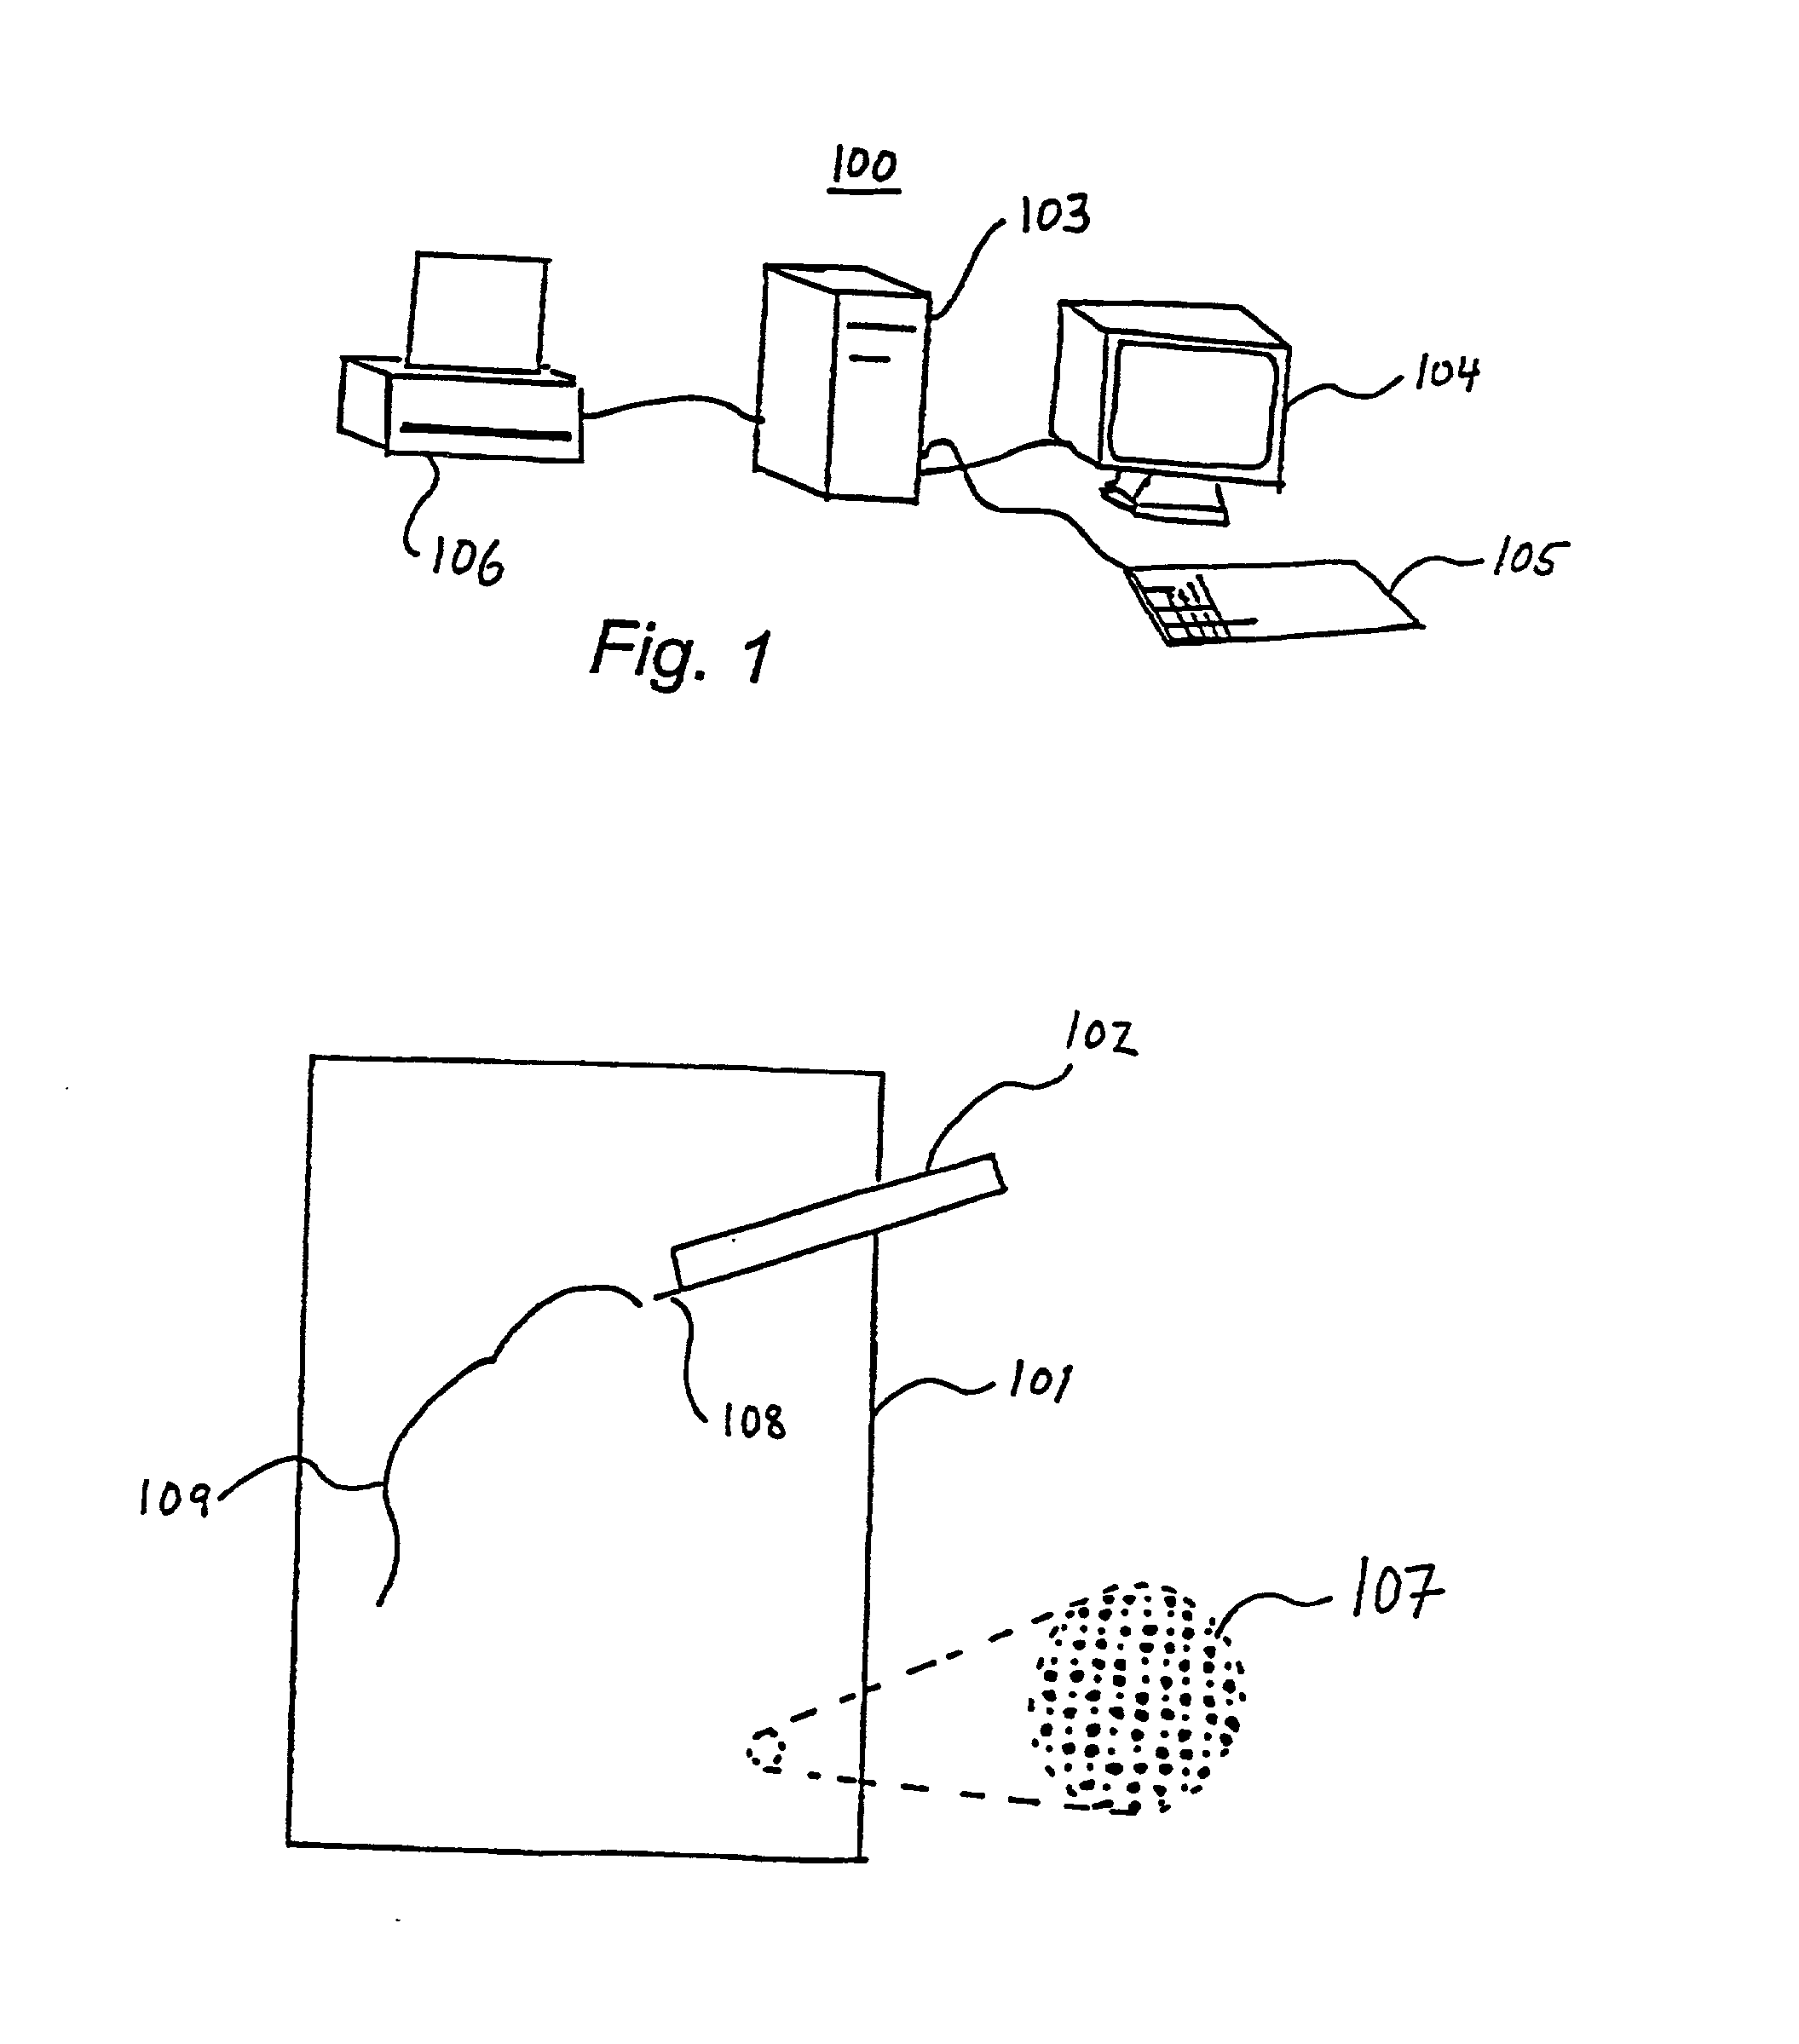 Data form having a position-coding pattern detectable by an optical sensor